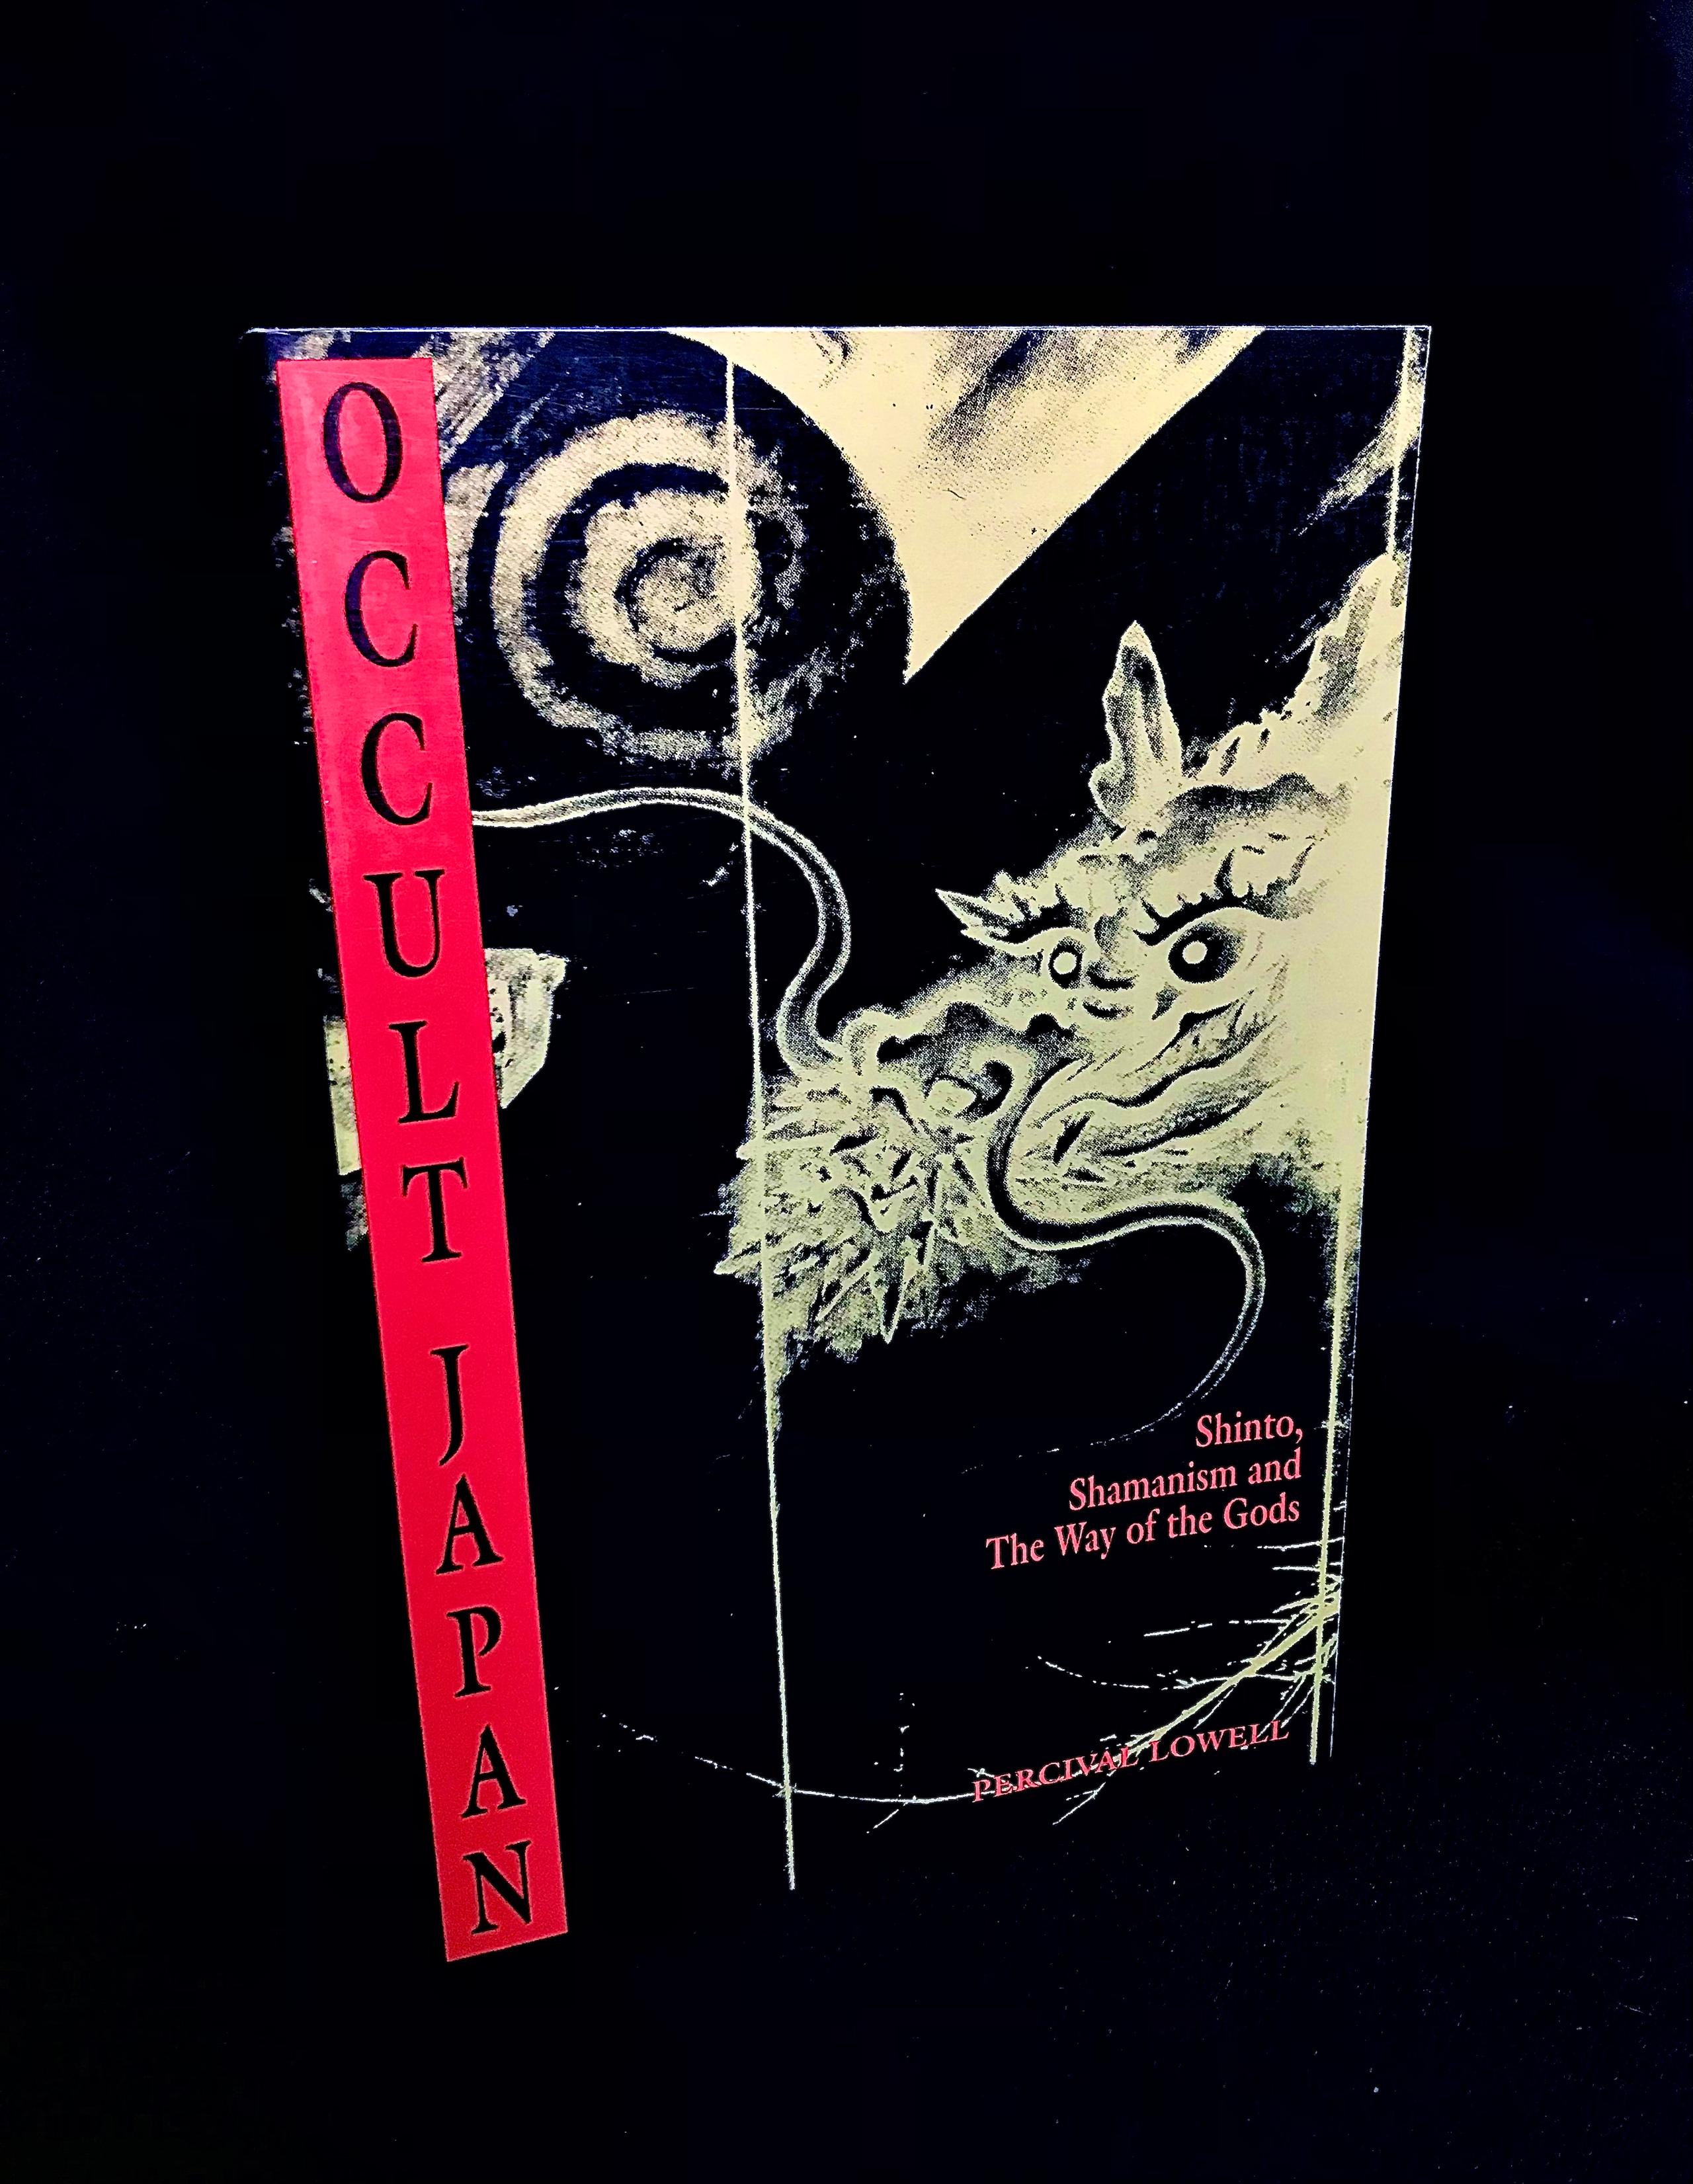 Occult Japan: Shinto, Shamanism and The Way Of The Gods by Percival Lowell